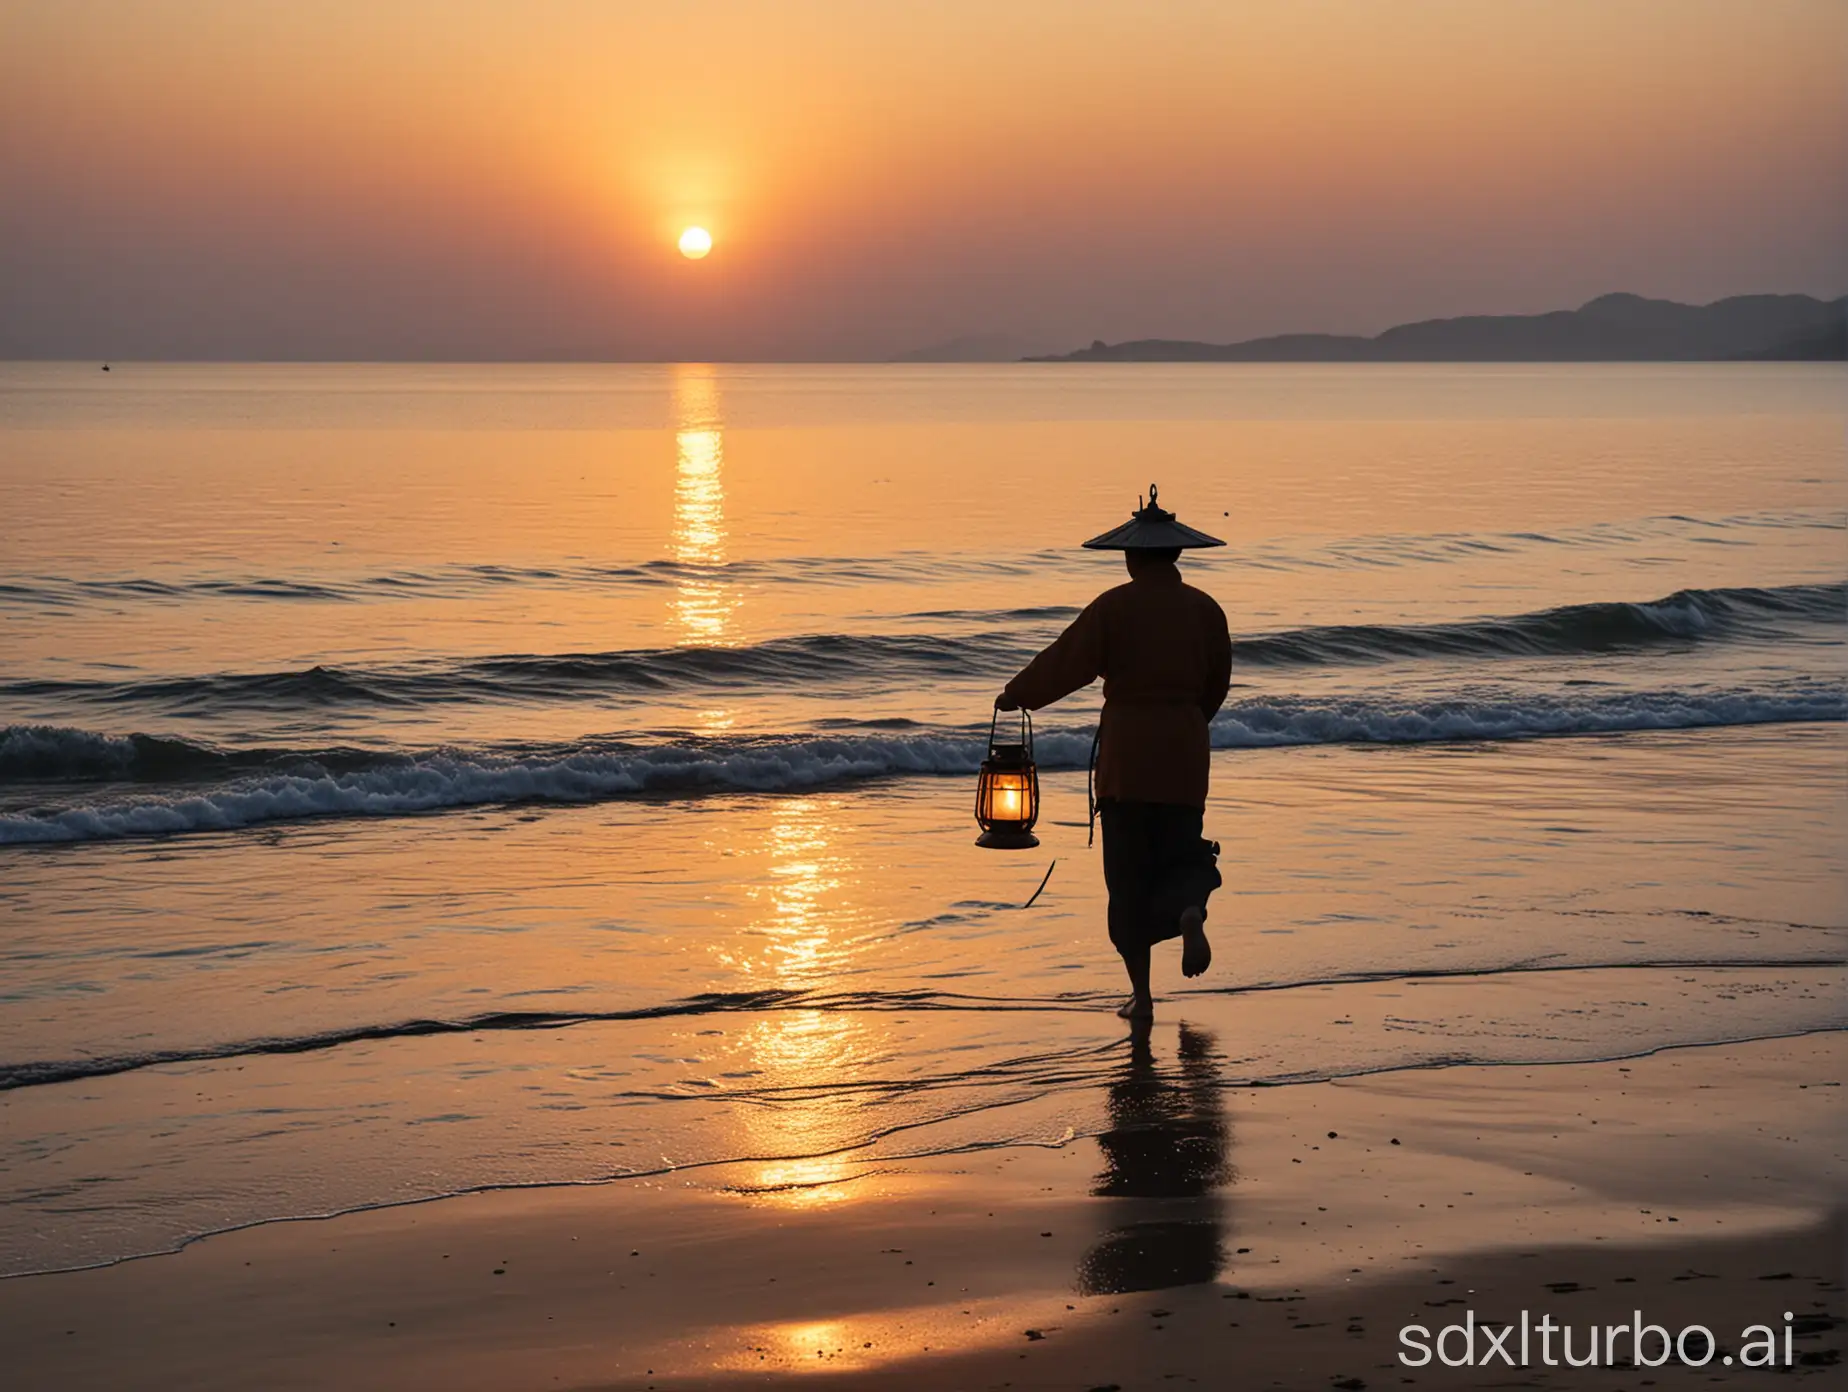 Gongzi-Strongsen-Running-with-Lantern-at-Sunset-by-the-Sea